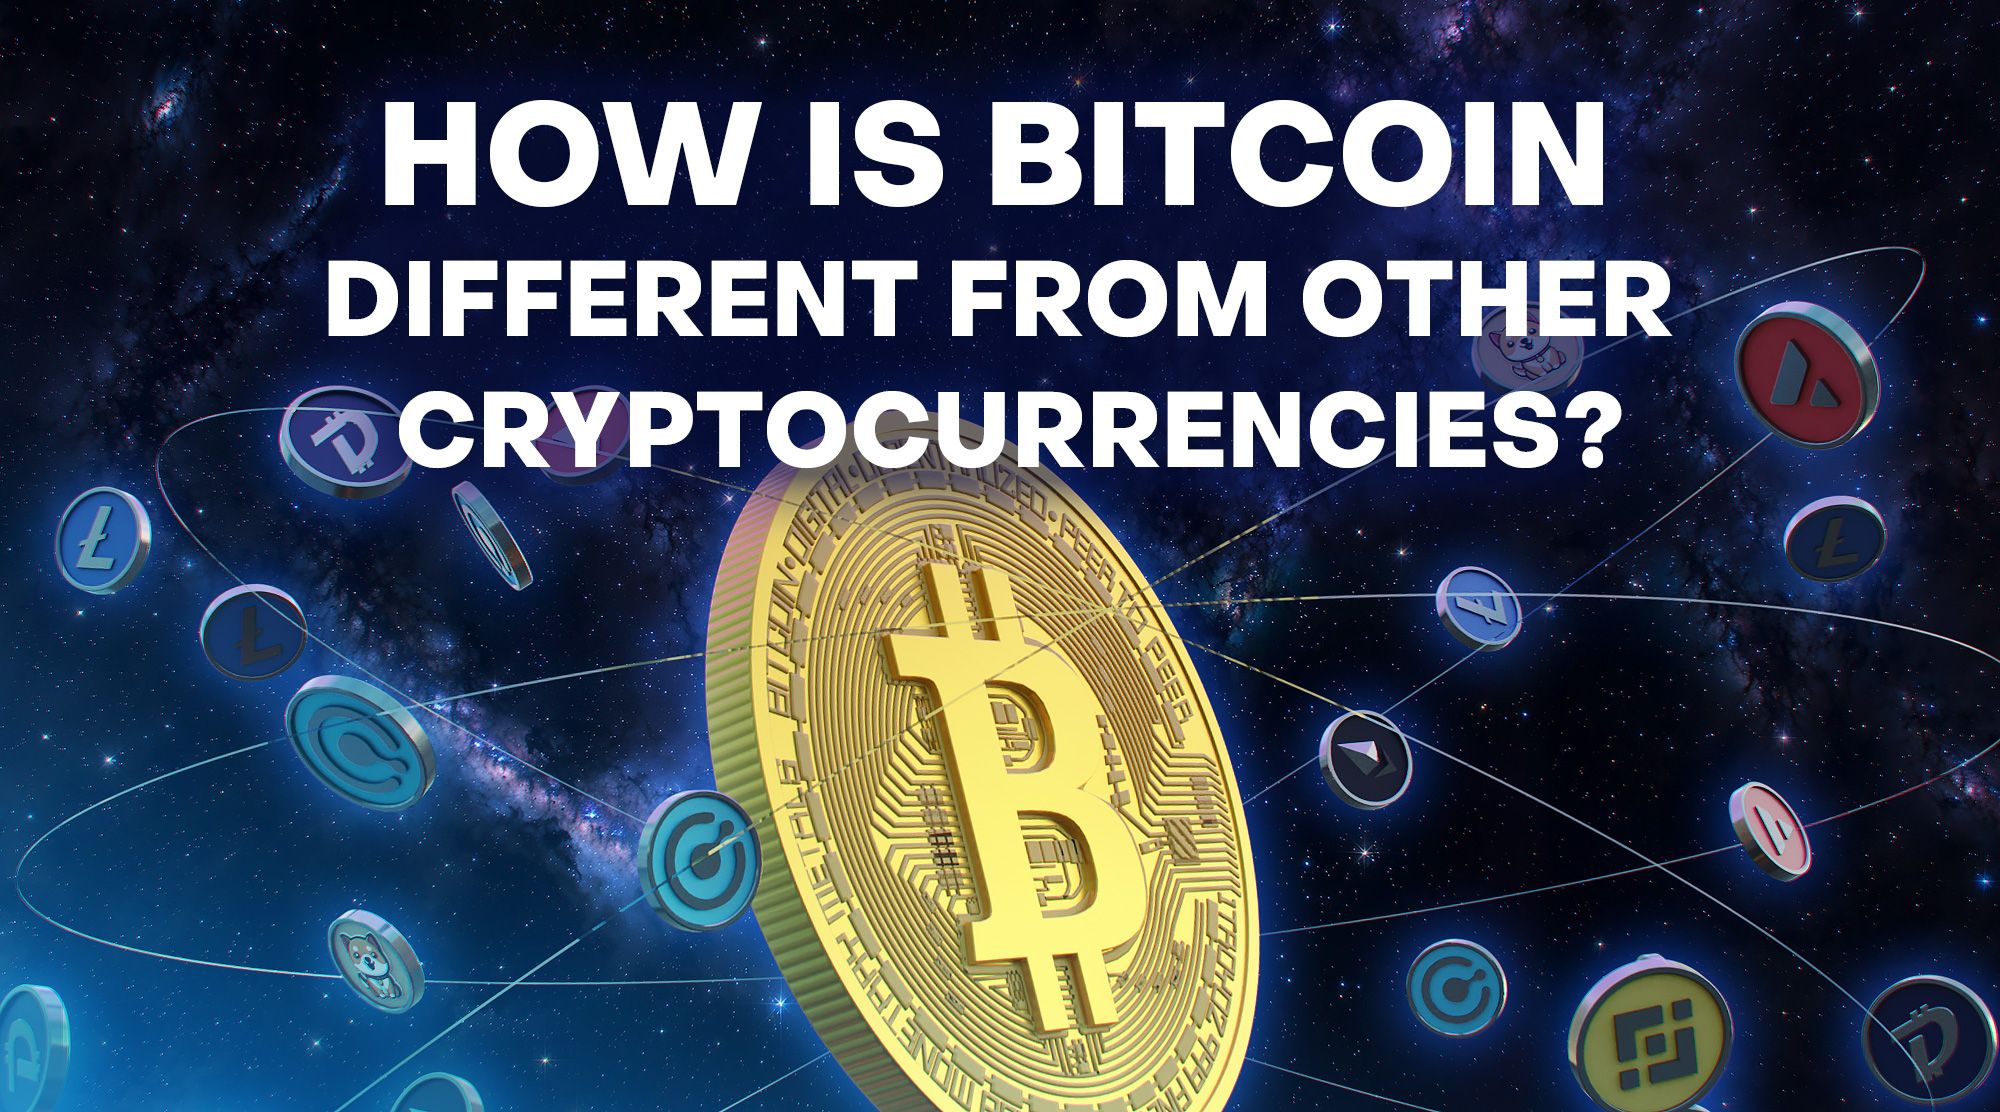 How Is Bitcoin Different from Other Cryptocurrencies?